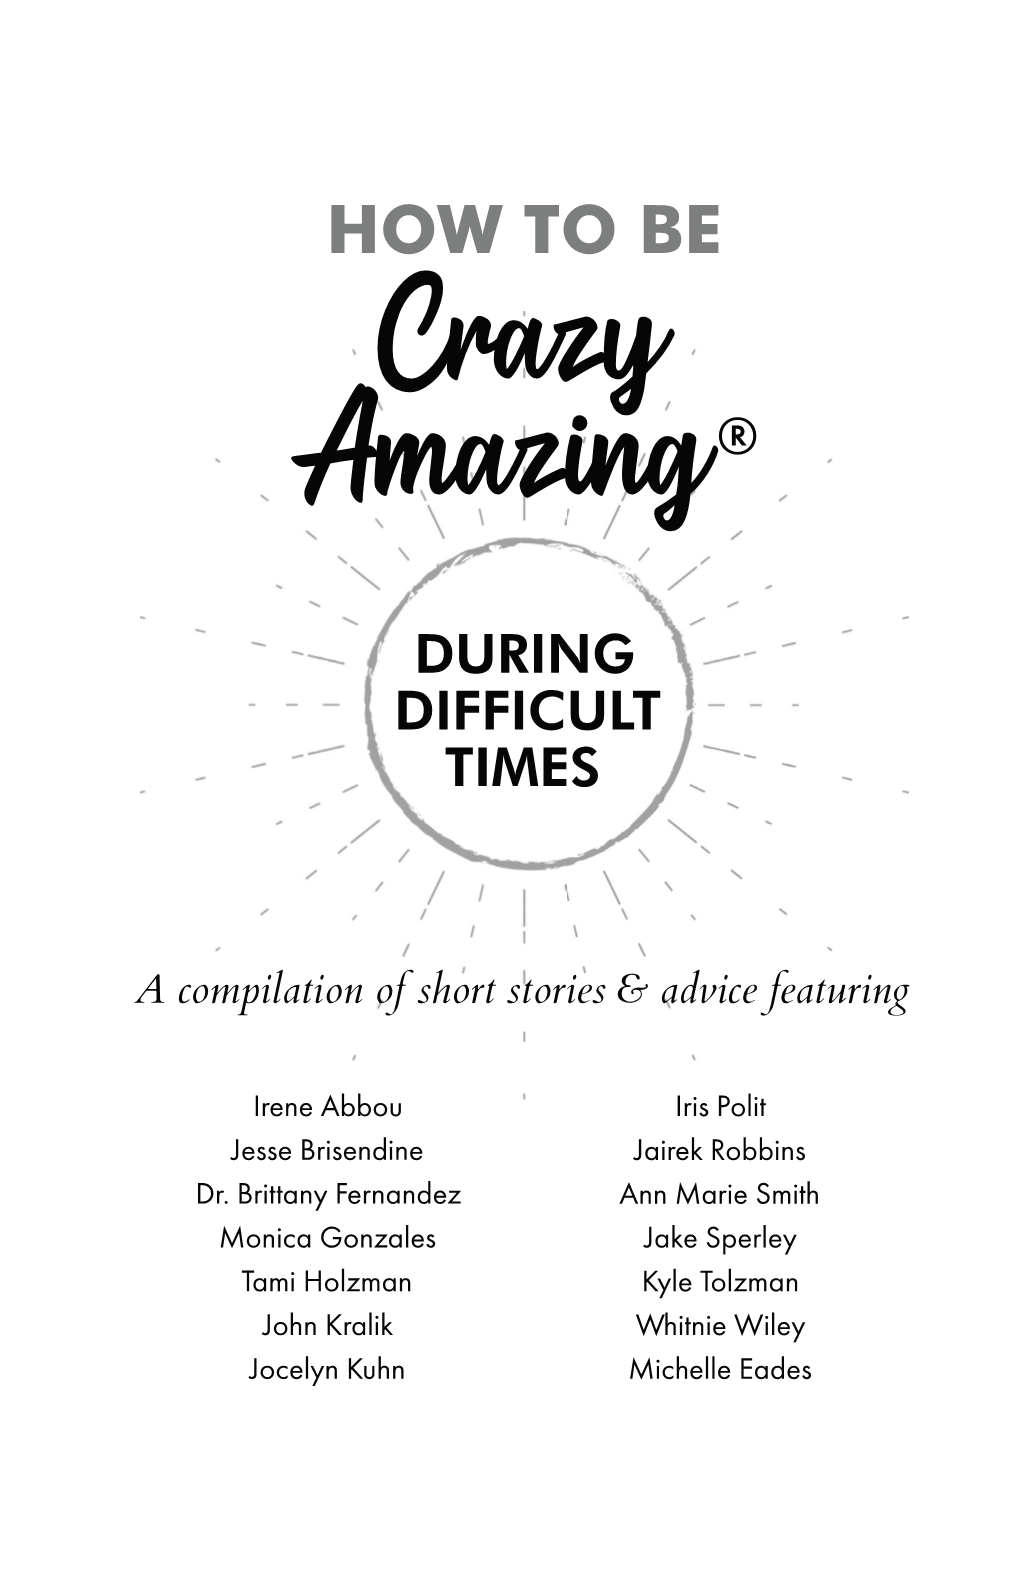 How to Be CRAZY AMAZING® During Difficult Times: a Compilation of Short Stories & Advice Featuring